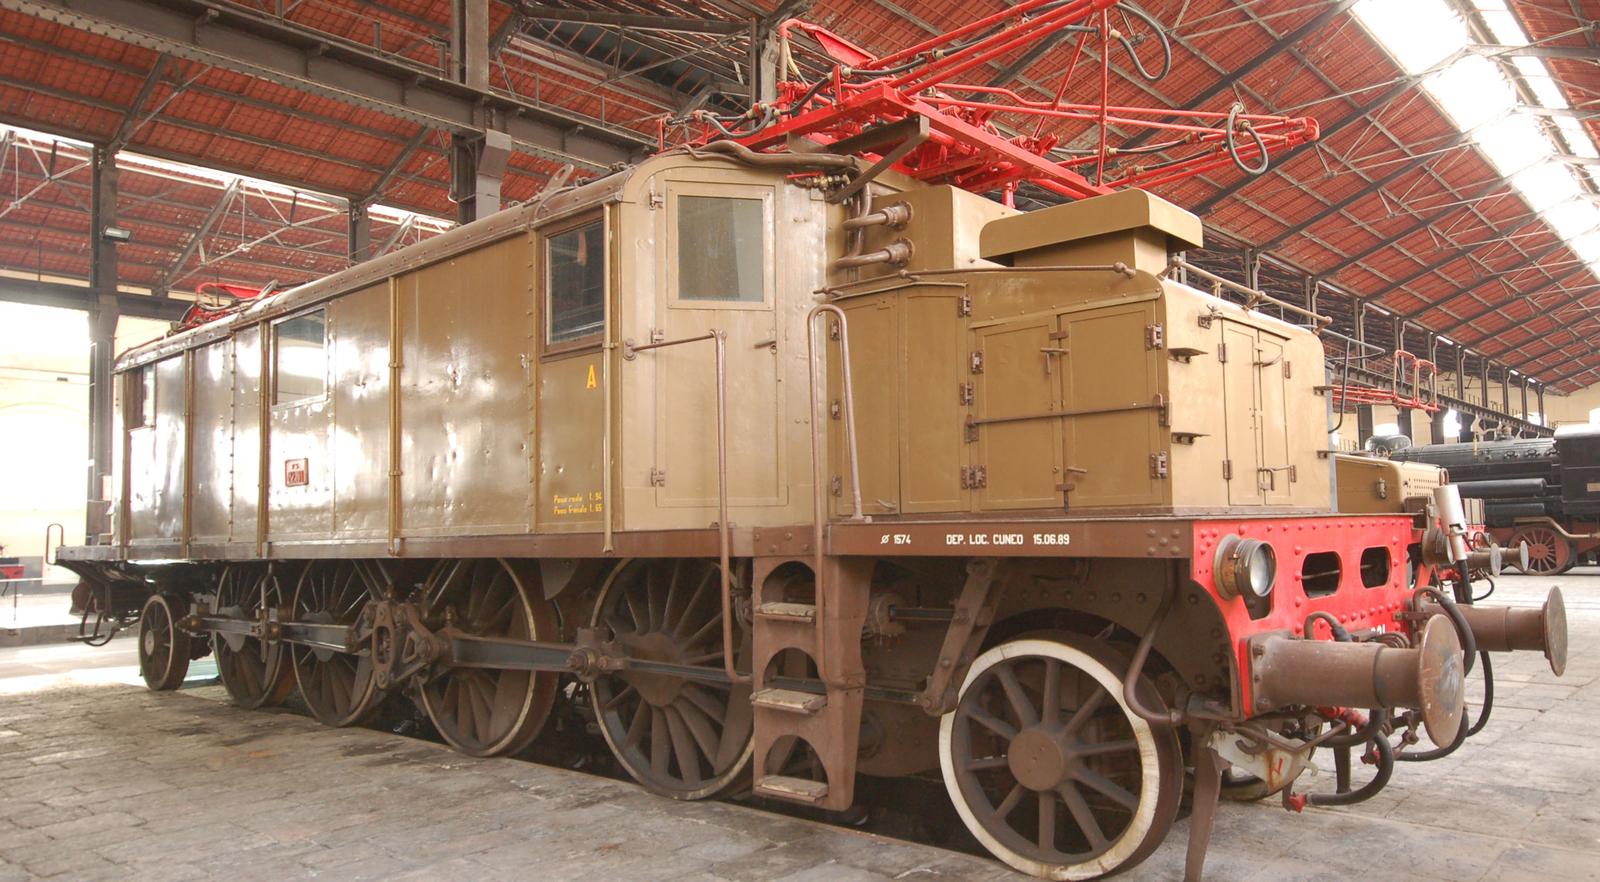 E.432.011 in the National Railway Museum in Pietrarsa